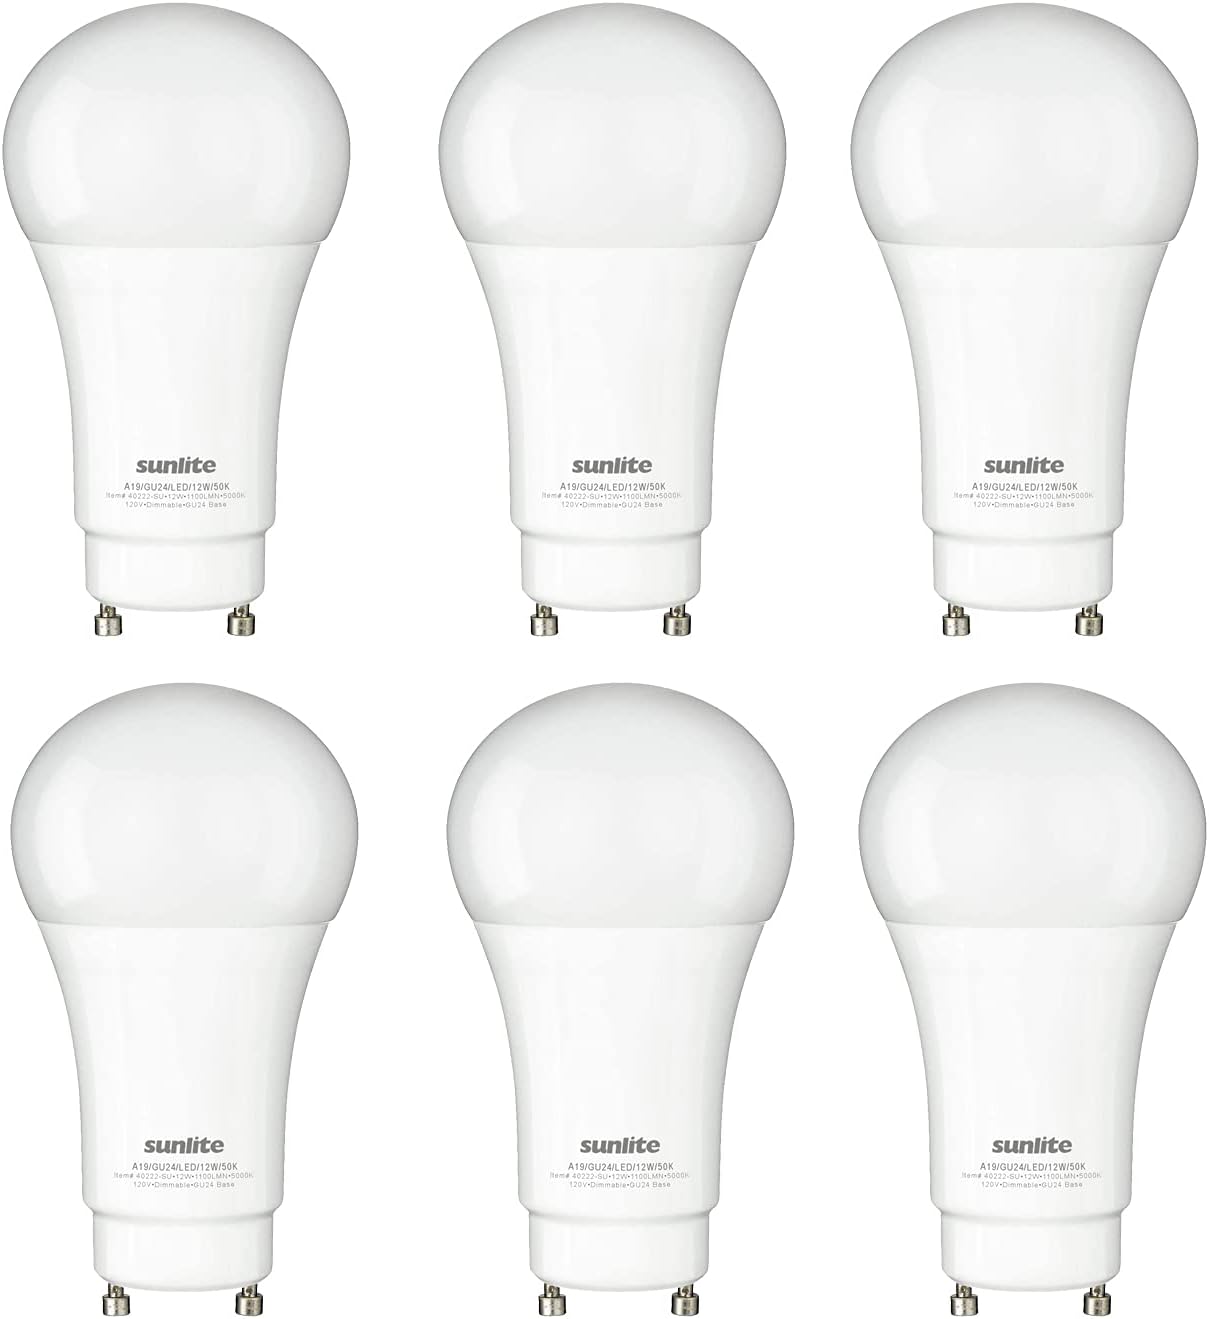 Sunlite 88256 LED A19 Light Bulb 12 Watts (75W Equivalent) 1100 Lumens, GU24 Twist and Lock Base, Dimmable, UL Listed, Energy Star, 5000K Super White, 6 Pack.